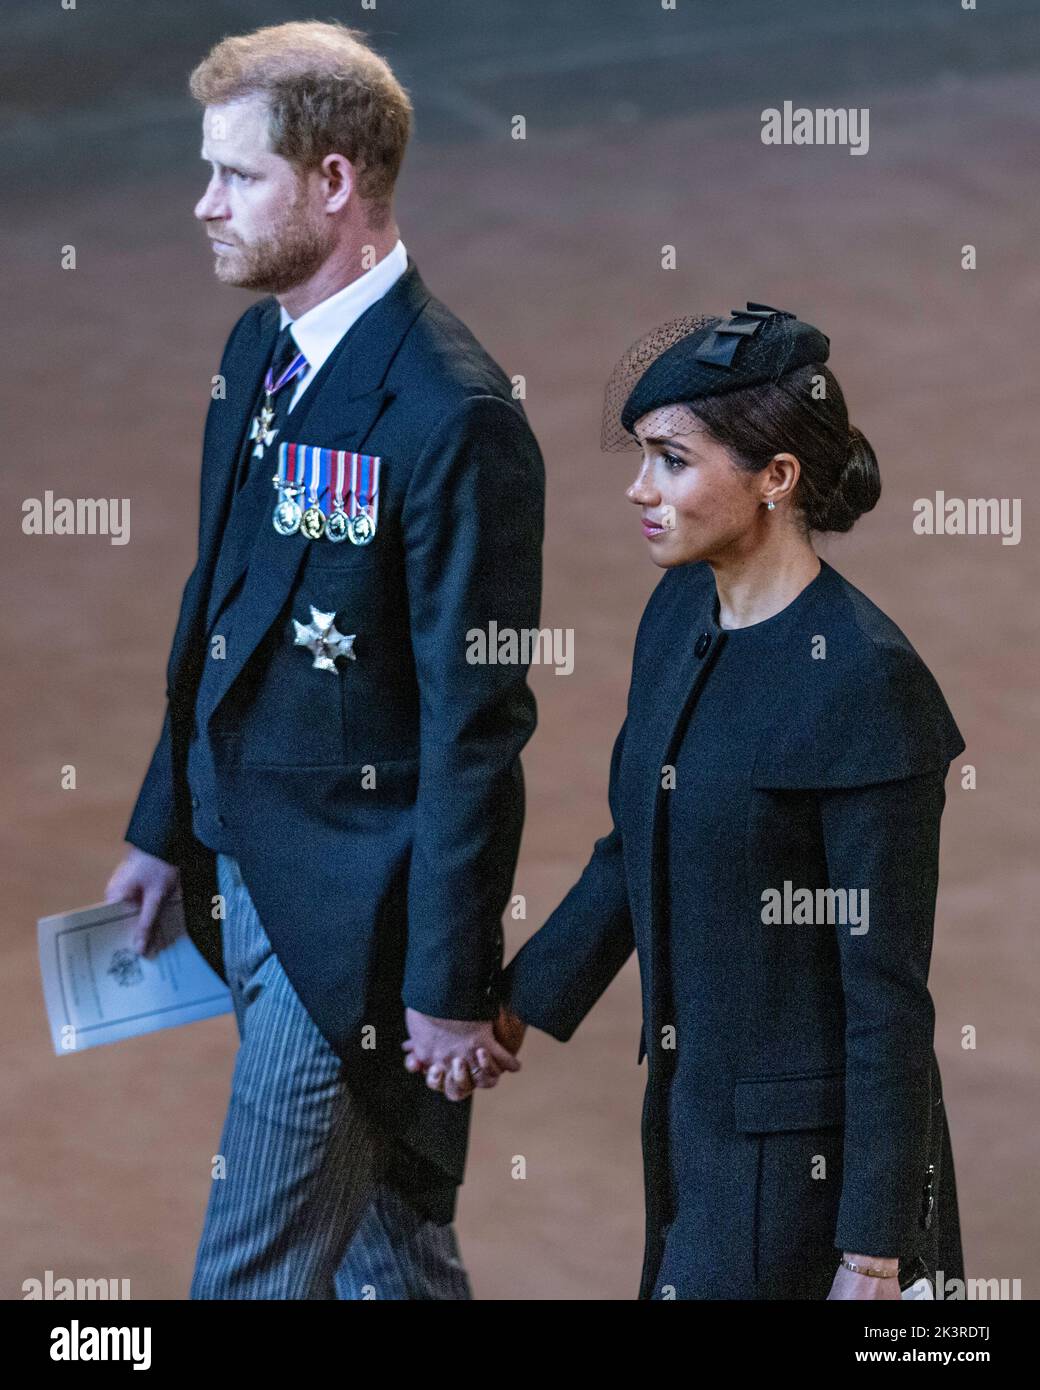 Prince Harry and Meghan Markle hold hands, Duke and Duchess of Sussex depart service for the arrival of Queen Elizabeth II coffin at Palace of Westmin Stock Photo